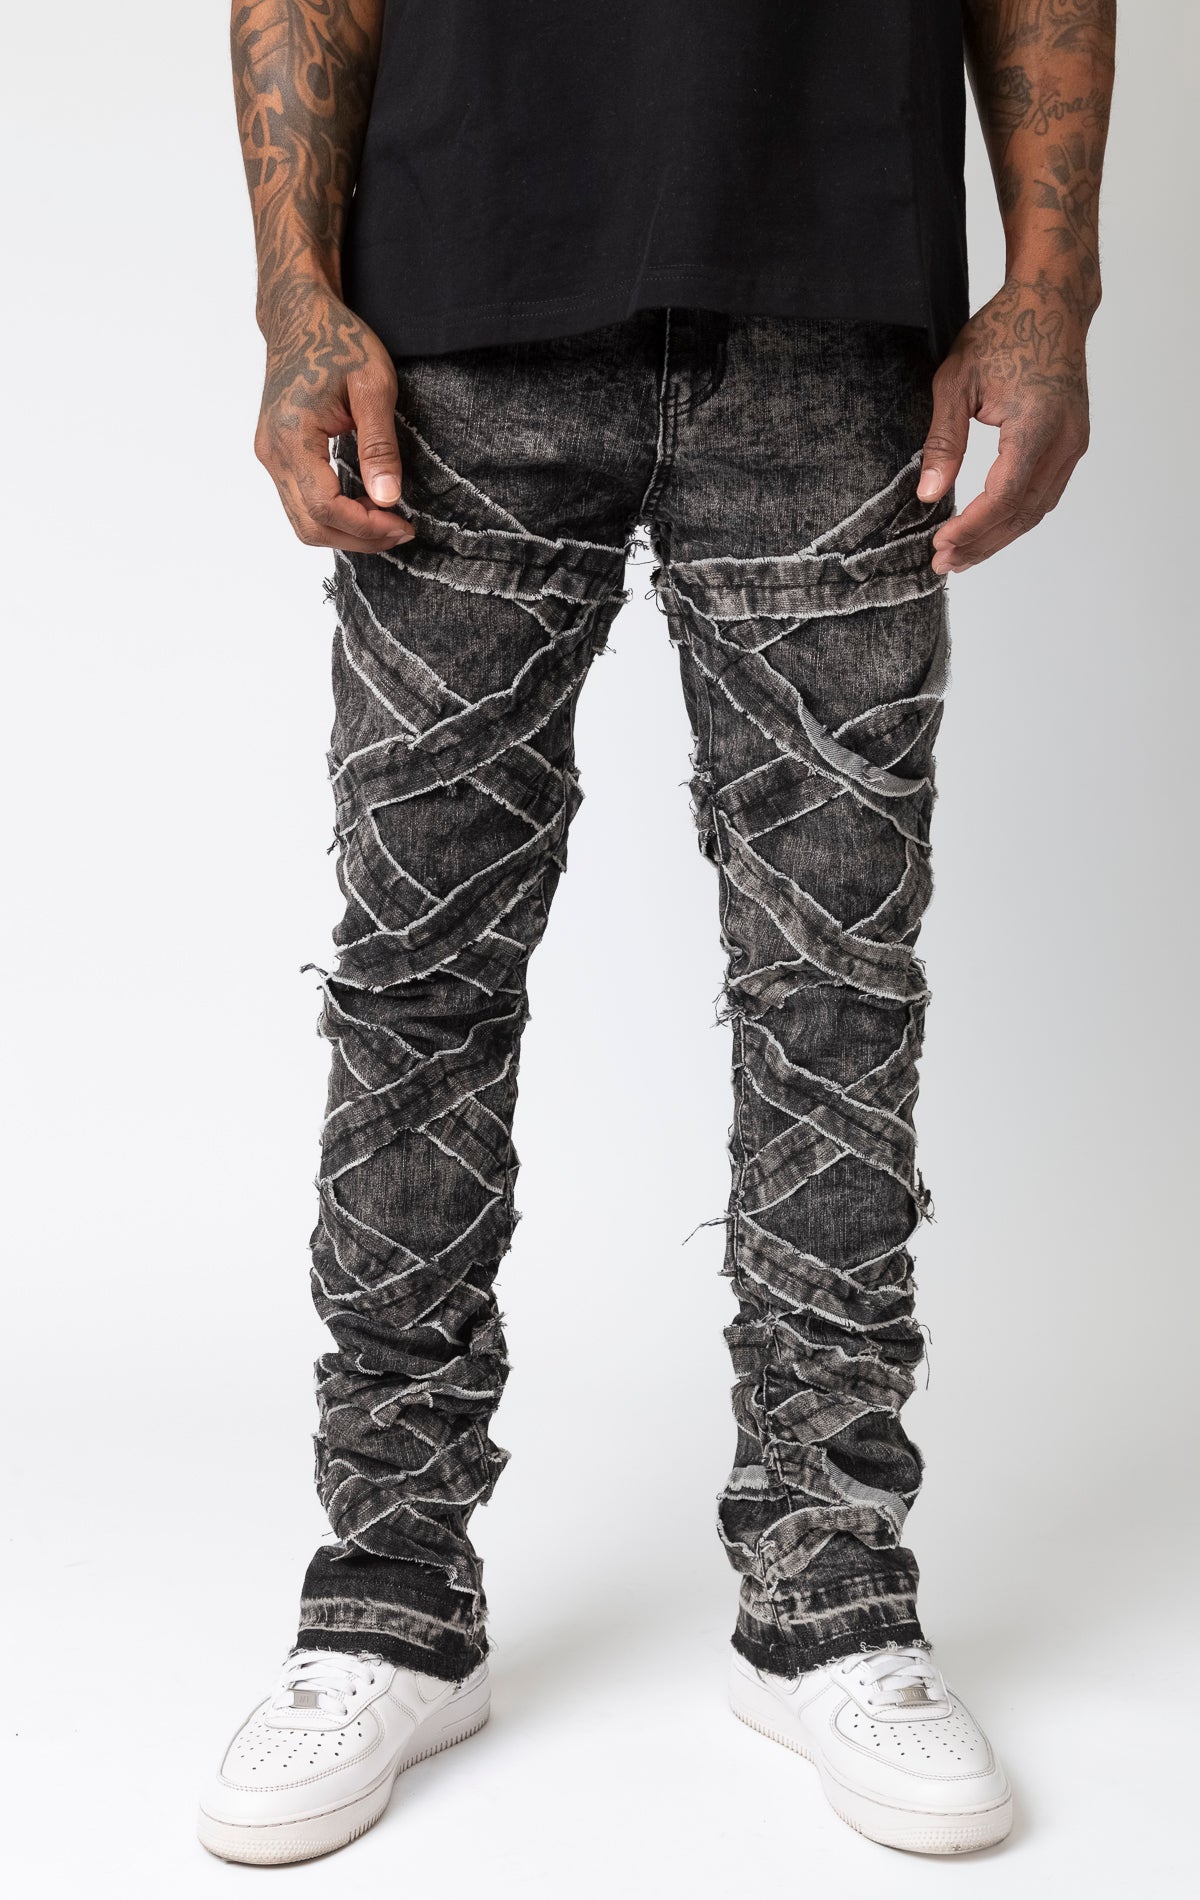 Black wash Distressed stacked jeans with a cut and sew panel construction, frayed detailing, and stretch fabric.